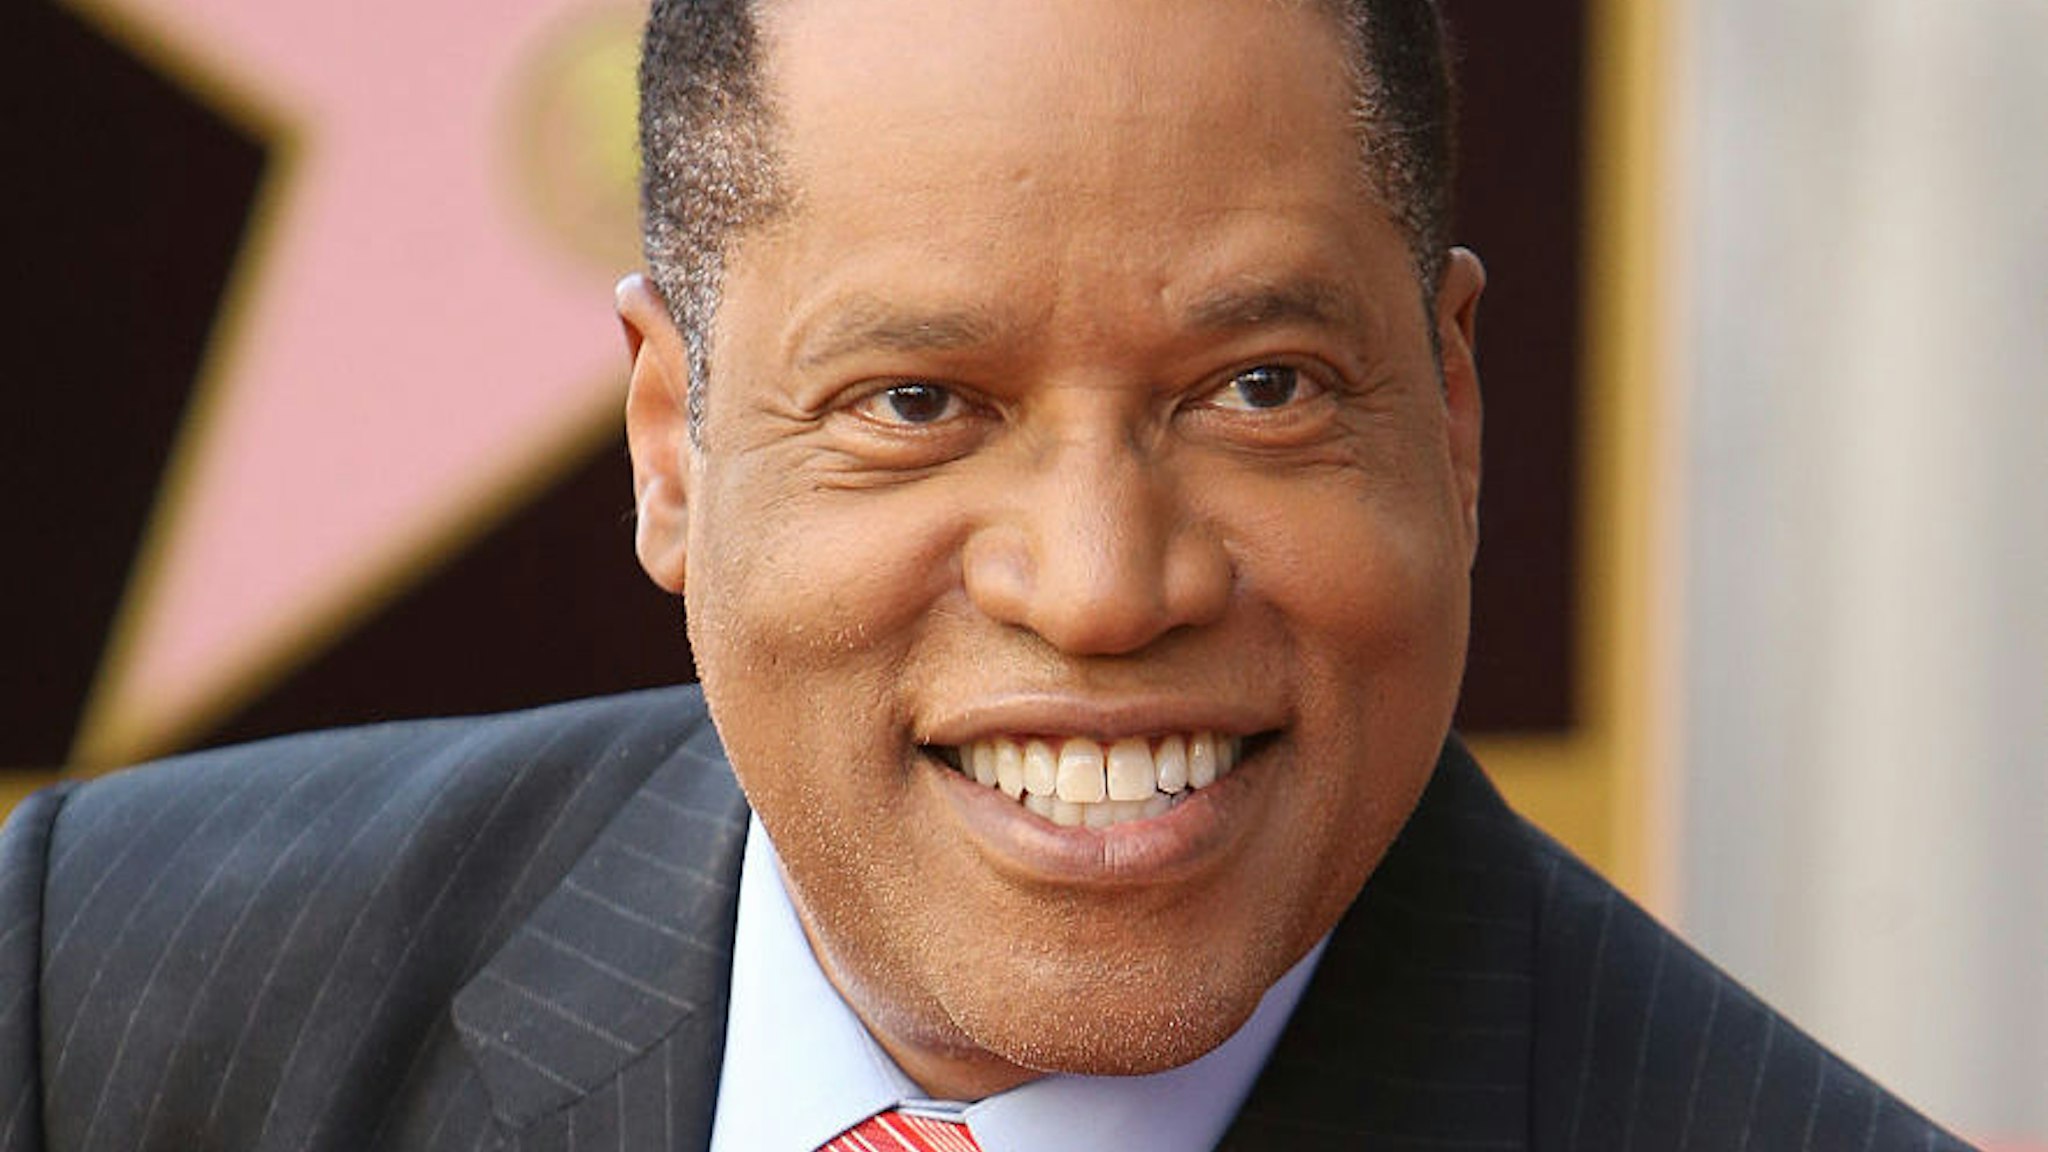 Larry Elder attends the ceremony honoring him with a Star on The Hollywood Walk of Fame on April 27, 2015 in Hollywood, California.